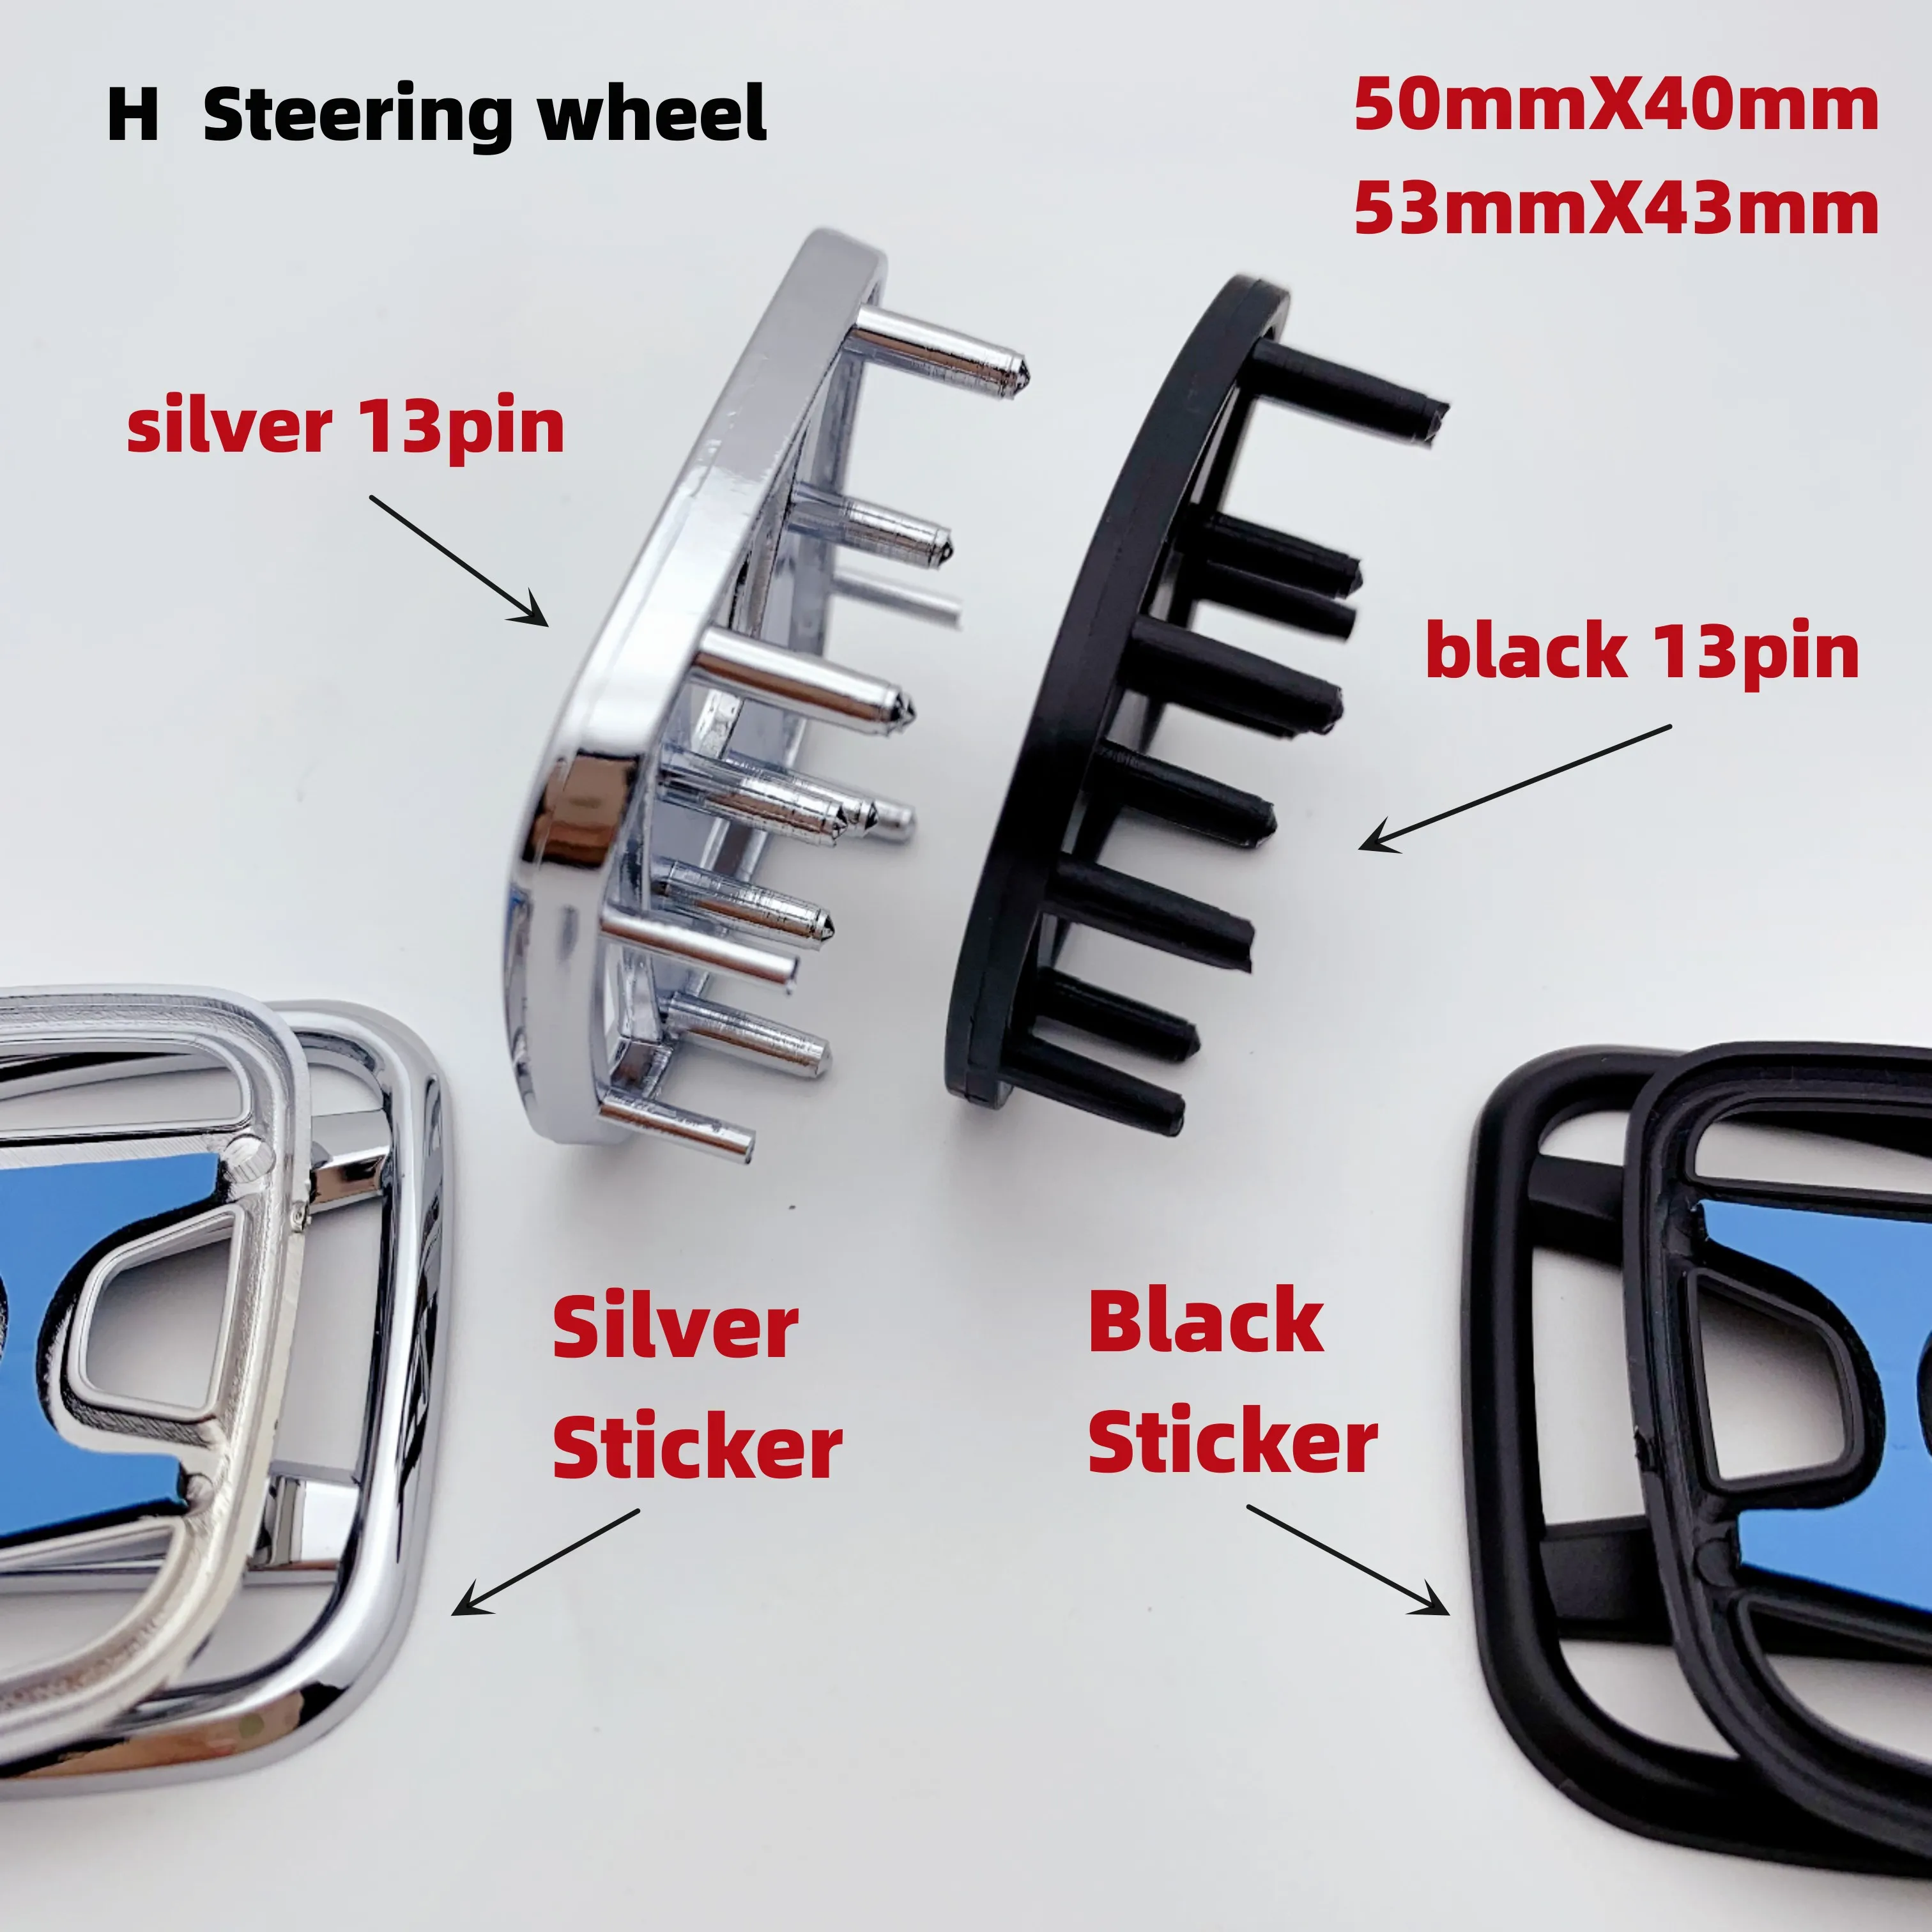 

Size 53mm/50mm Silver/Black ABS H ondA Car Steering Wheel Emblem H-Sticker For Civic Accord City CRV Jade Fit Hybrid Accessories